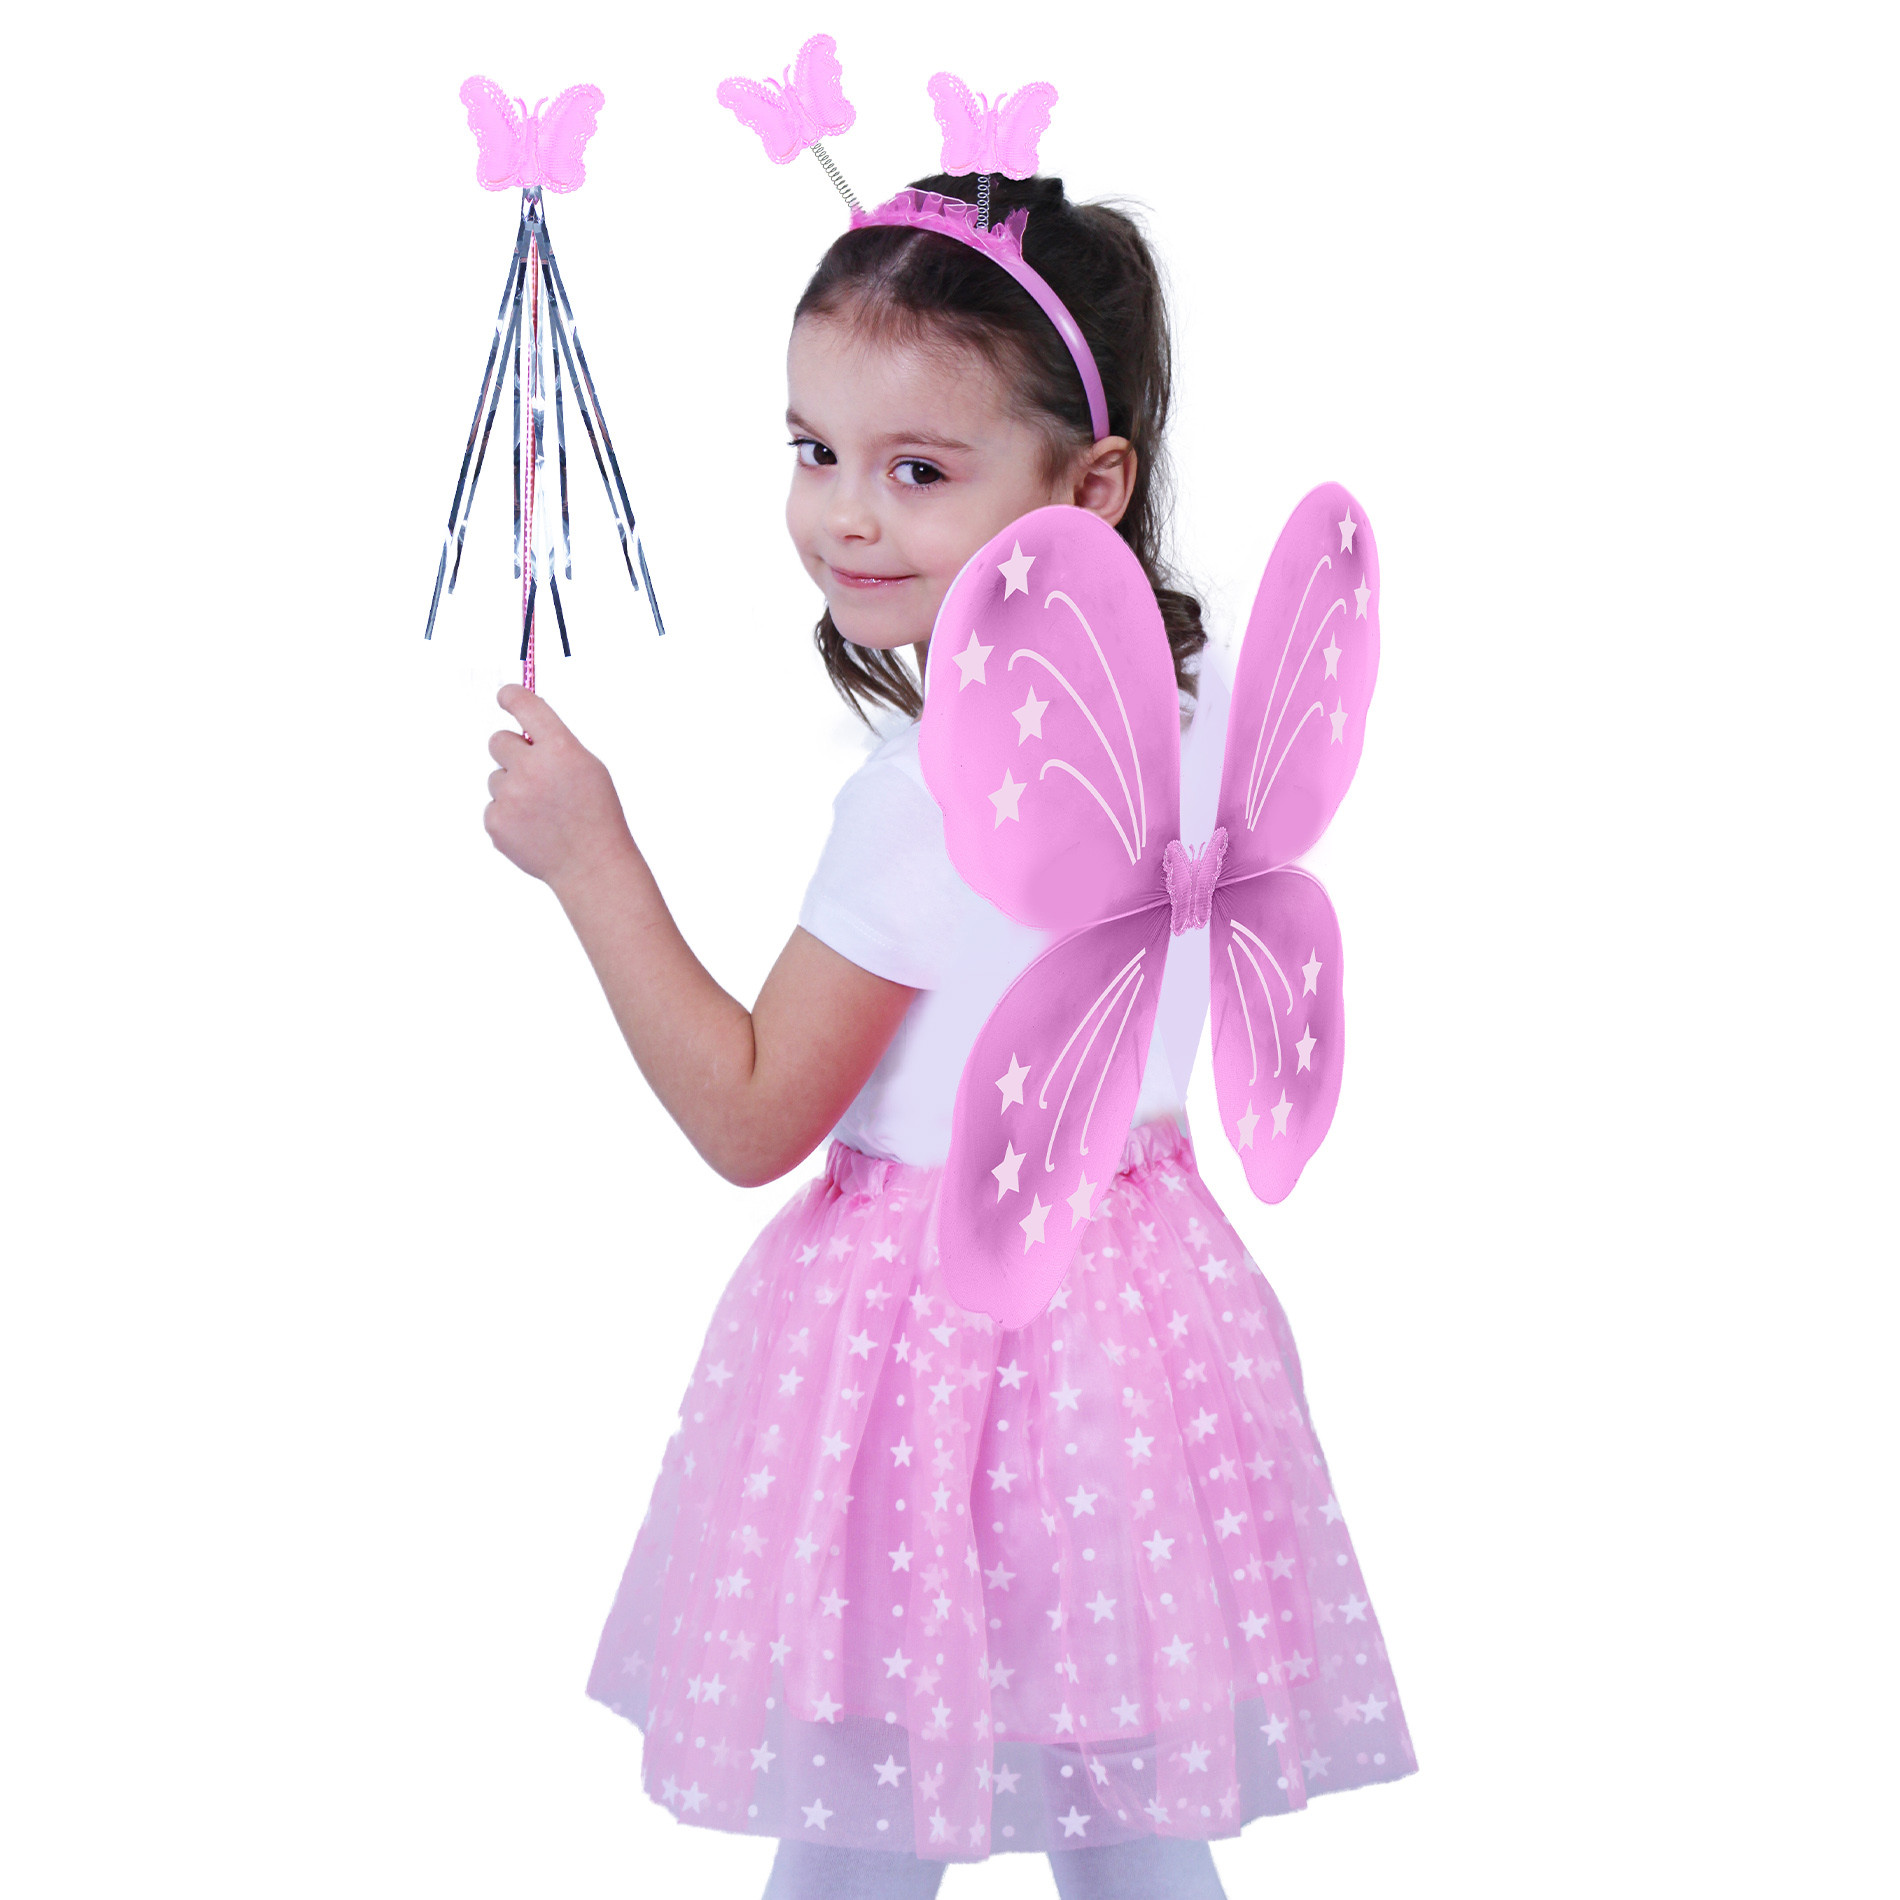 Children costume - pink butterfly